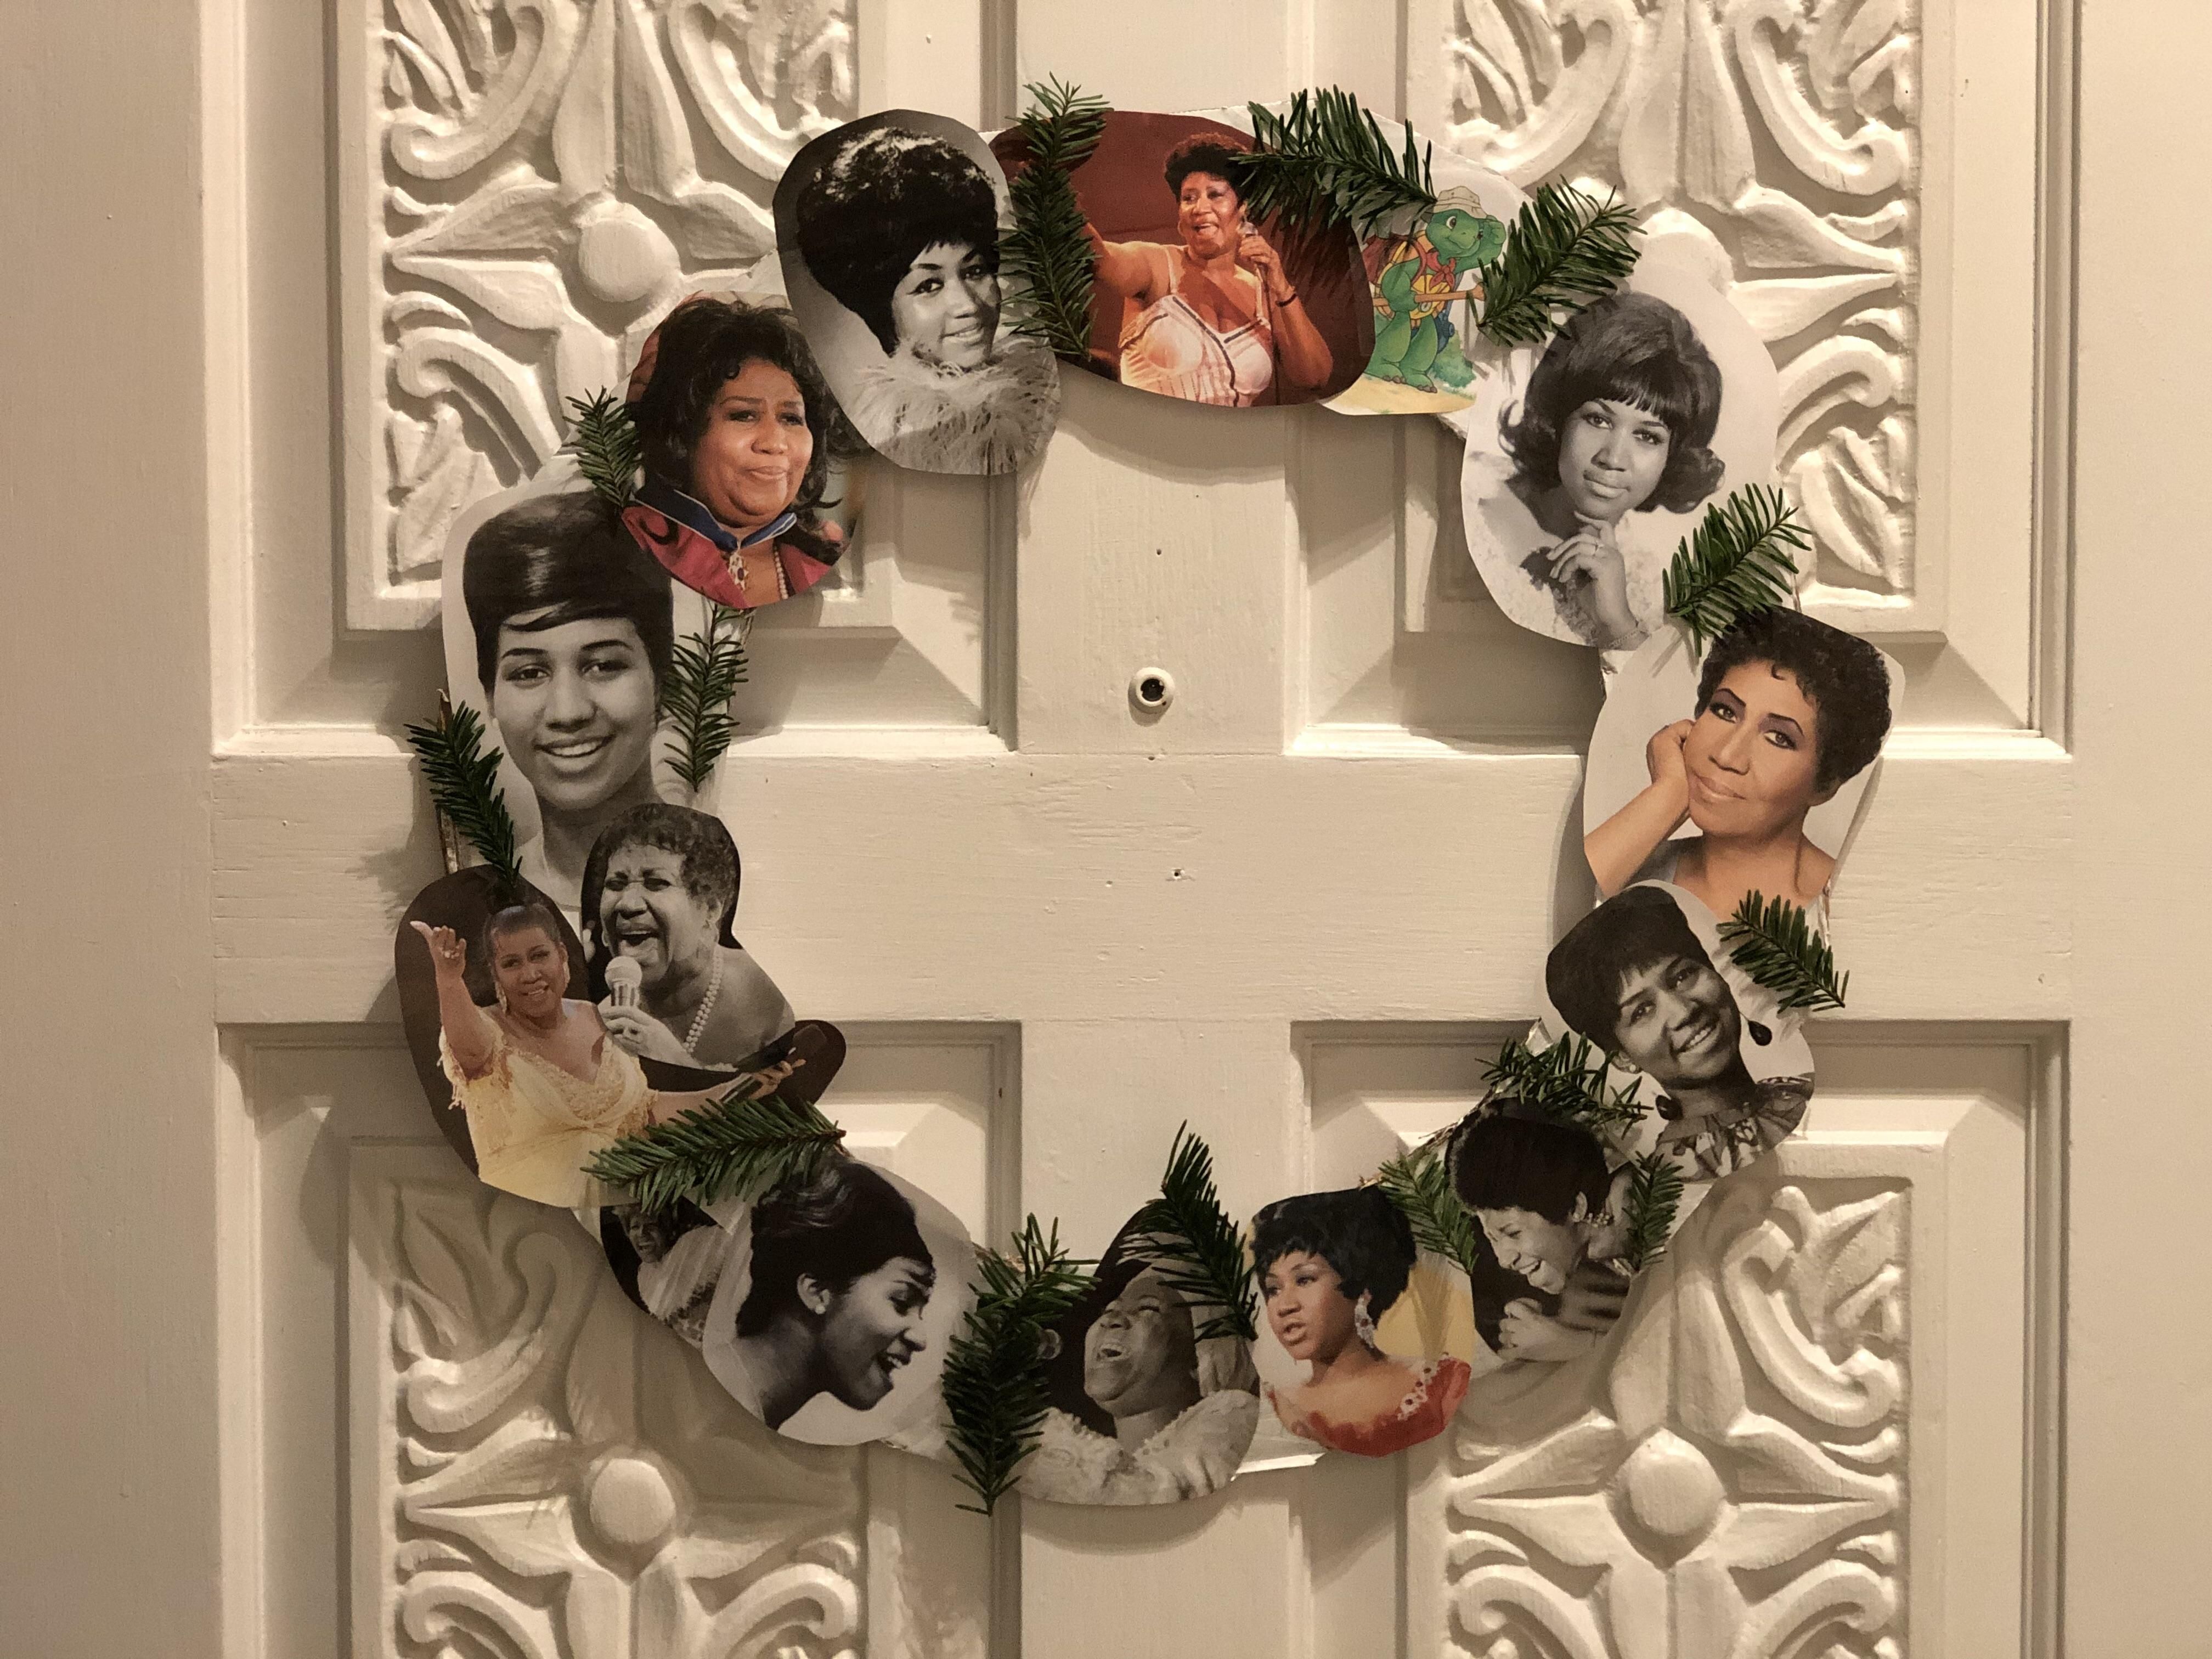 Got festive this year, made “a wreath of franklin”